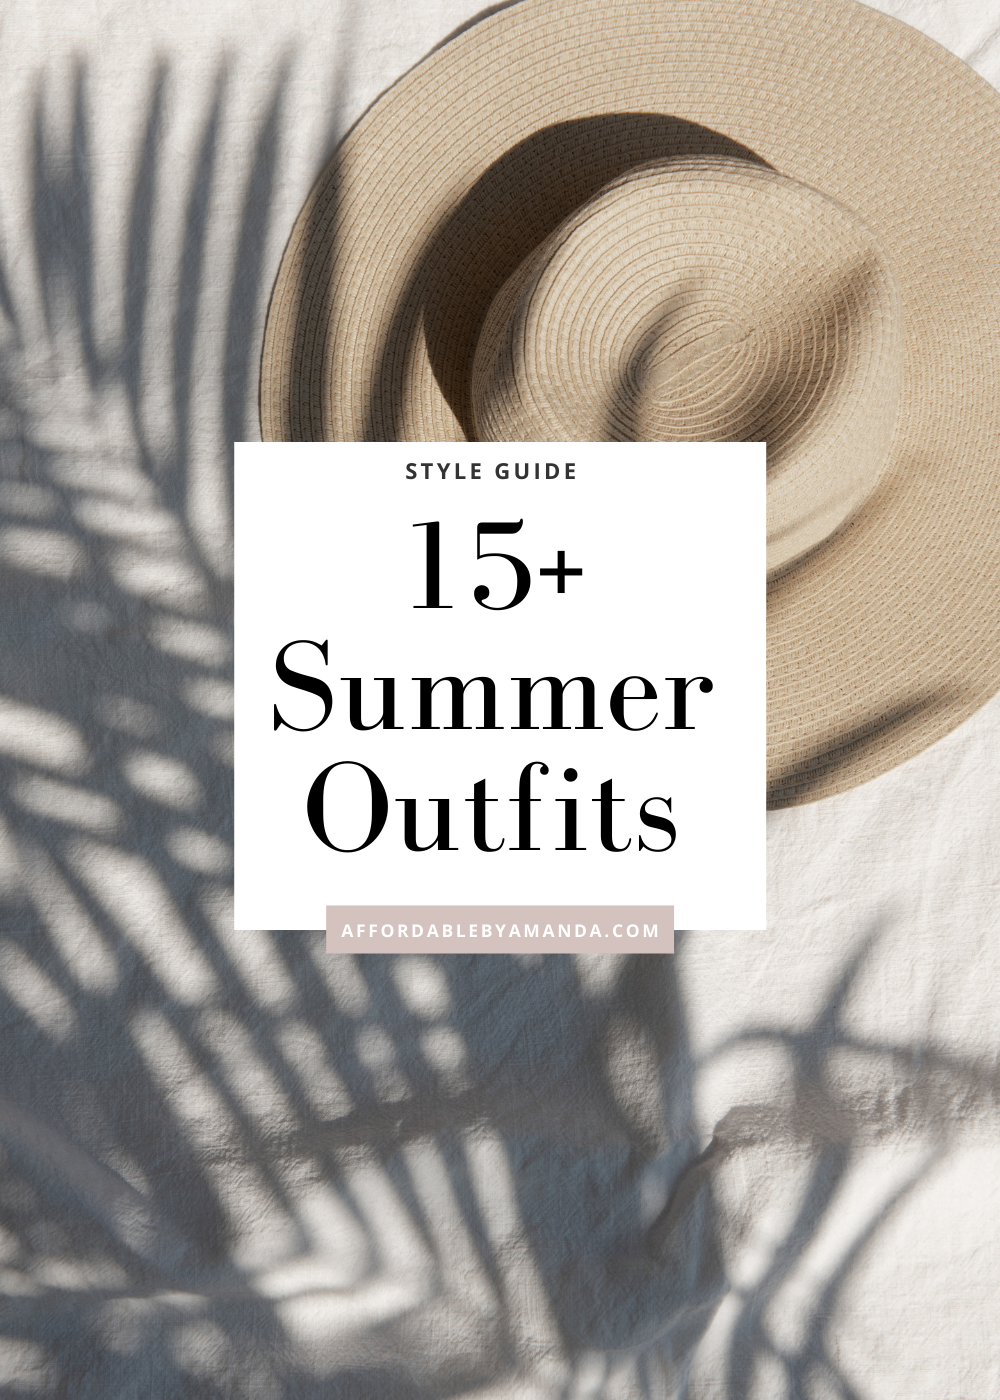 15 Summer Outfits - Affordable by Amanda